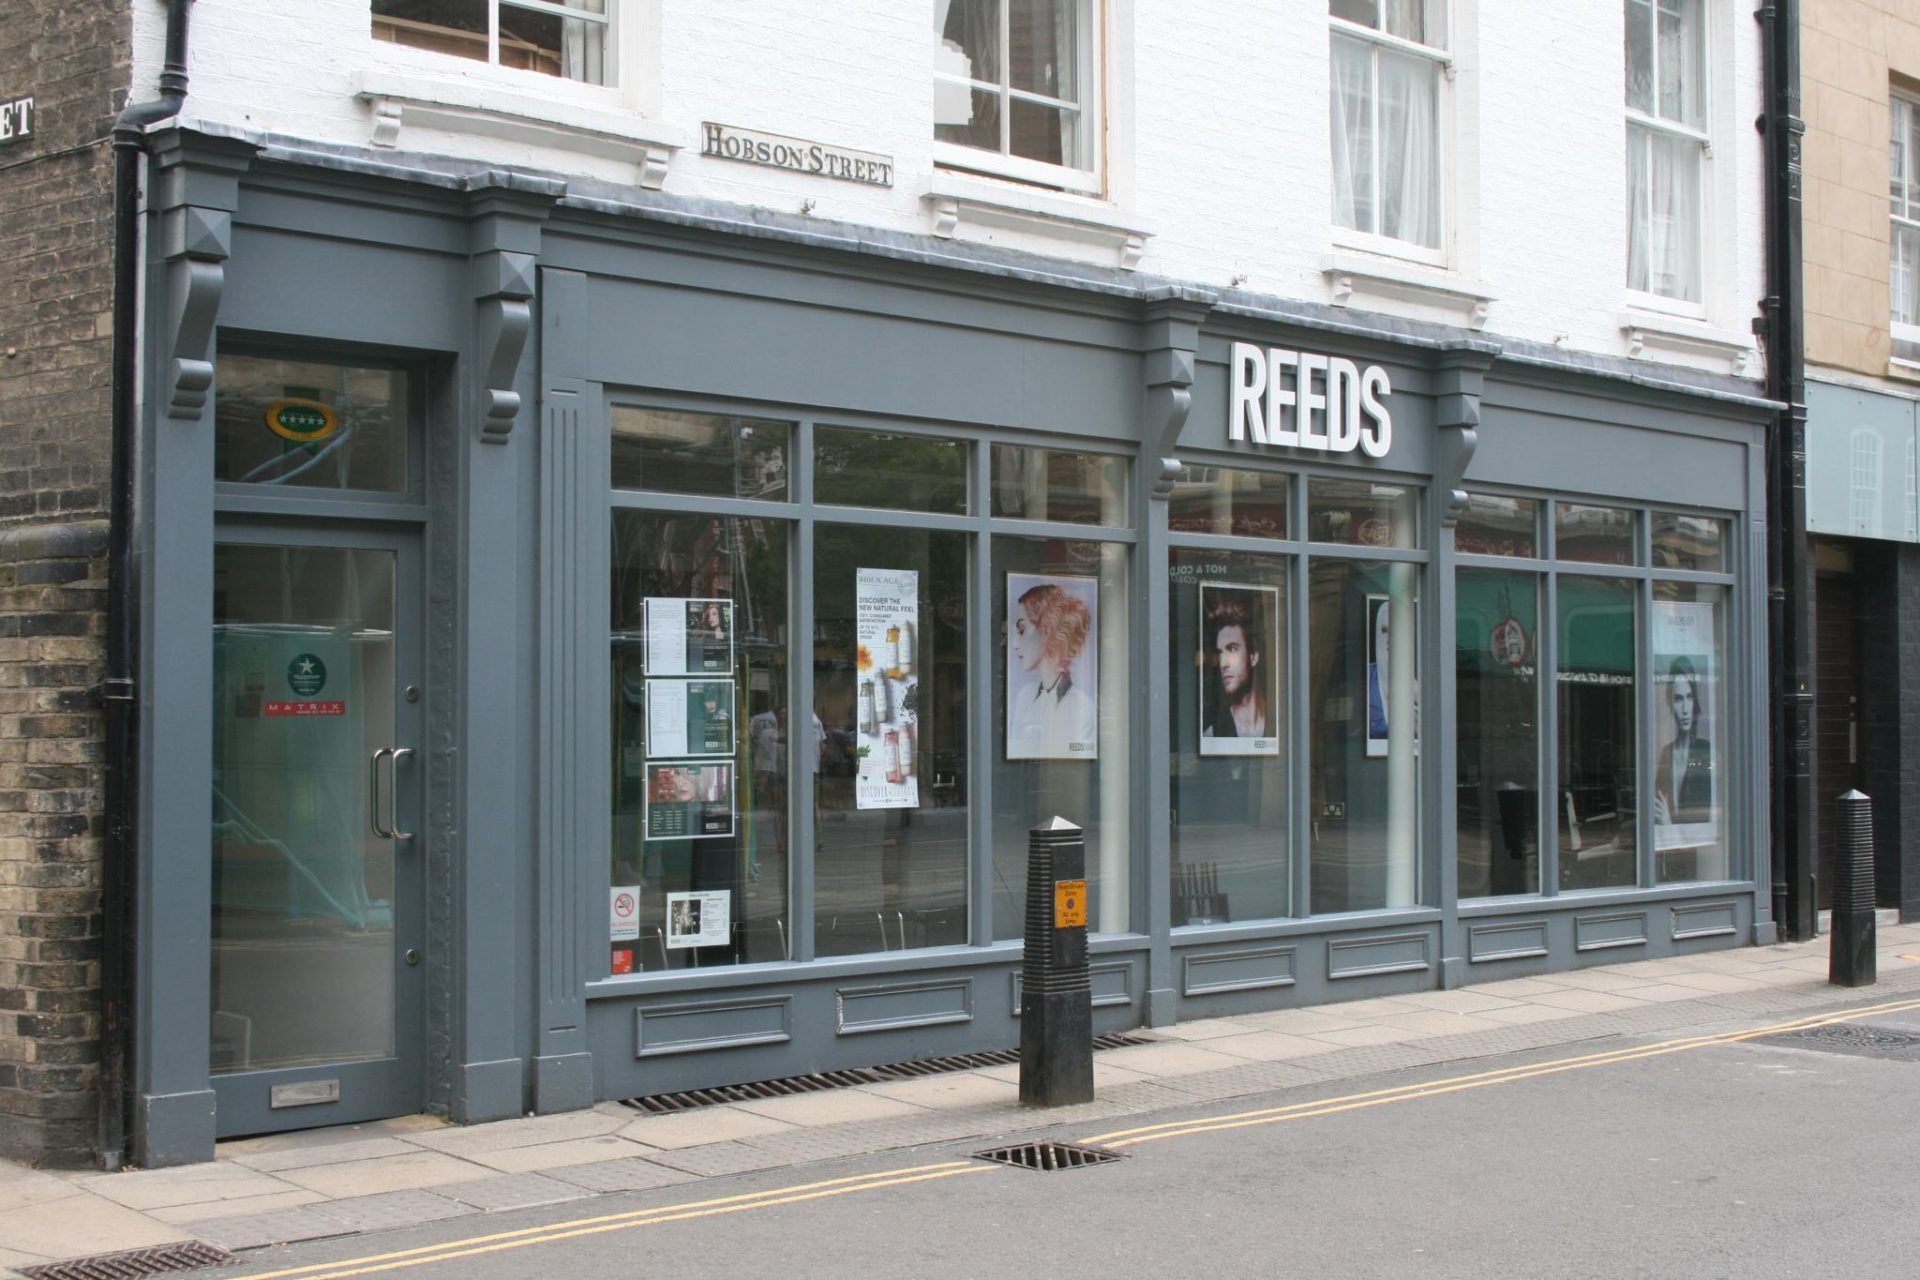 THE BEST HAIRDRESSERS IN CAMBRIDGE - REEDS HAIR SALONS